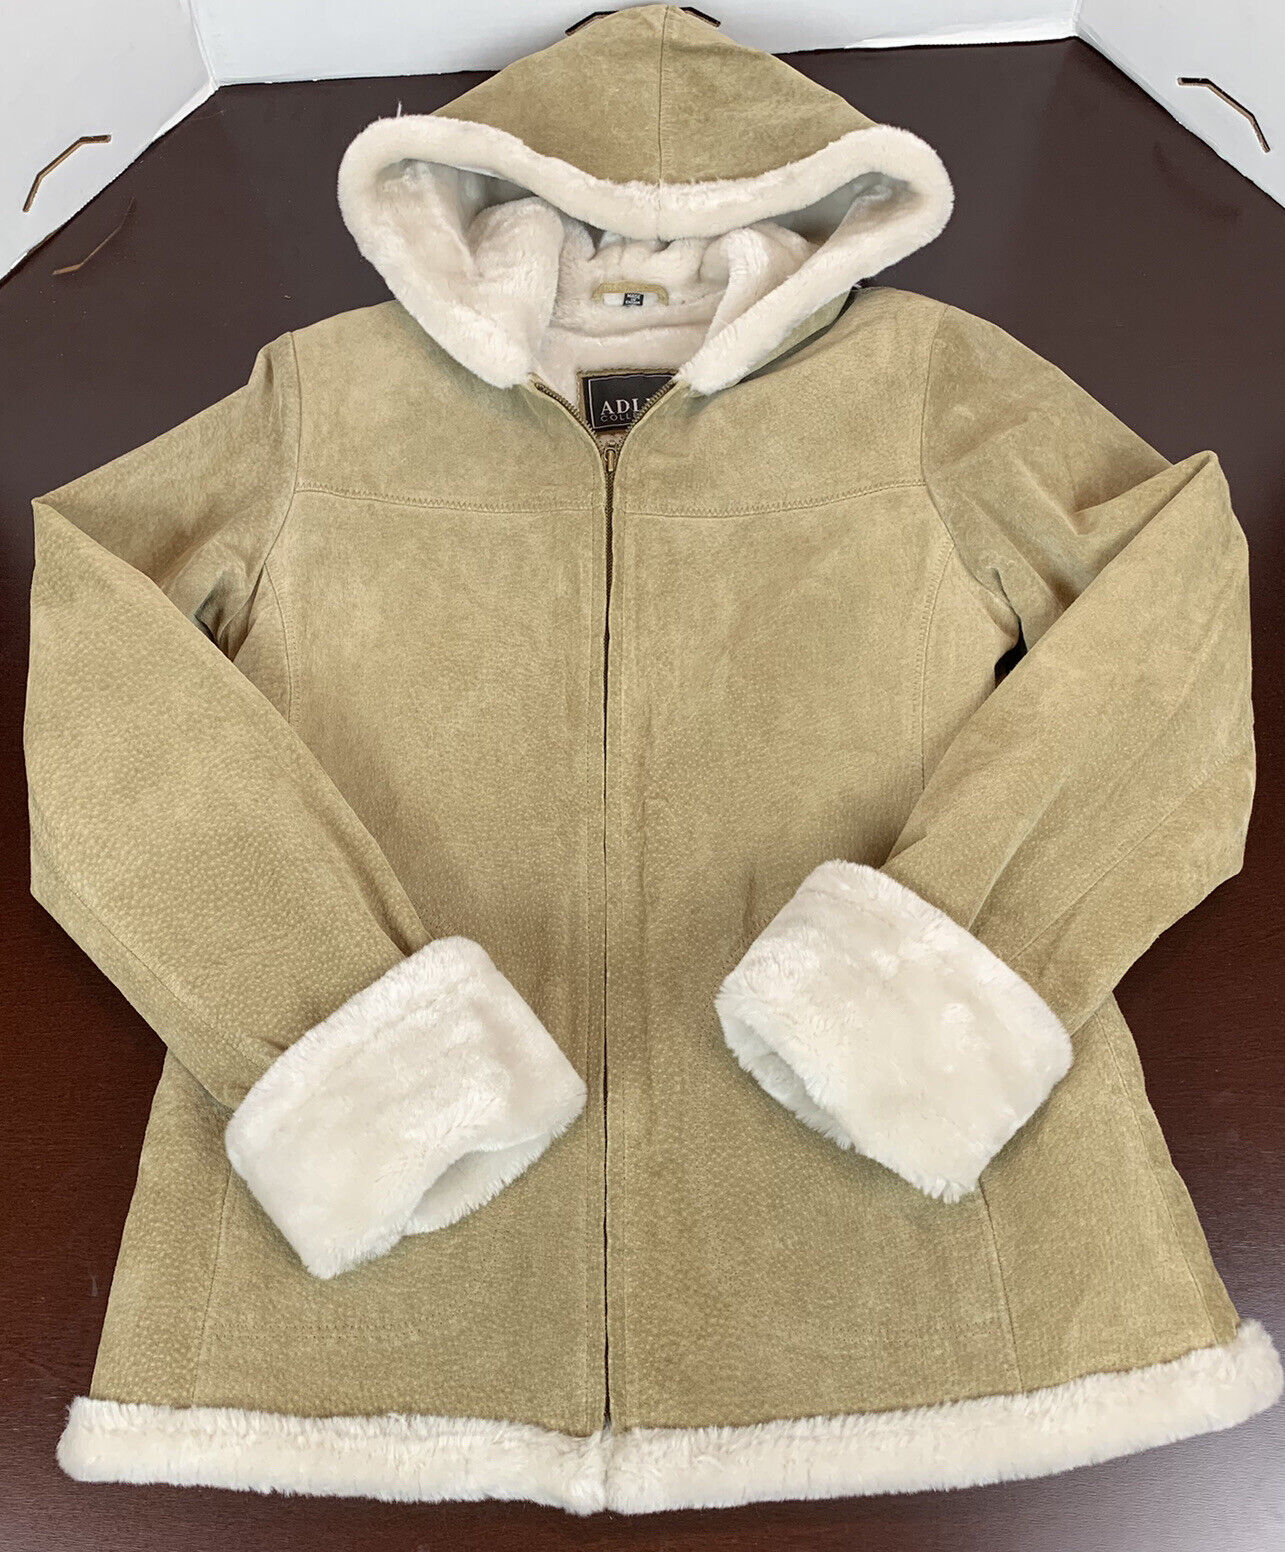 Lille bitte Rute overførsel Adler Collection Suede Leather Jacket Tan Full Zip Hooded Sherpa Lining  Women S | eBay